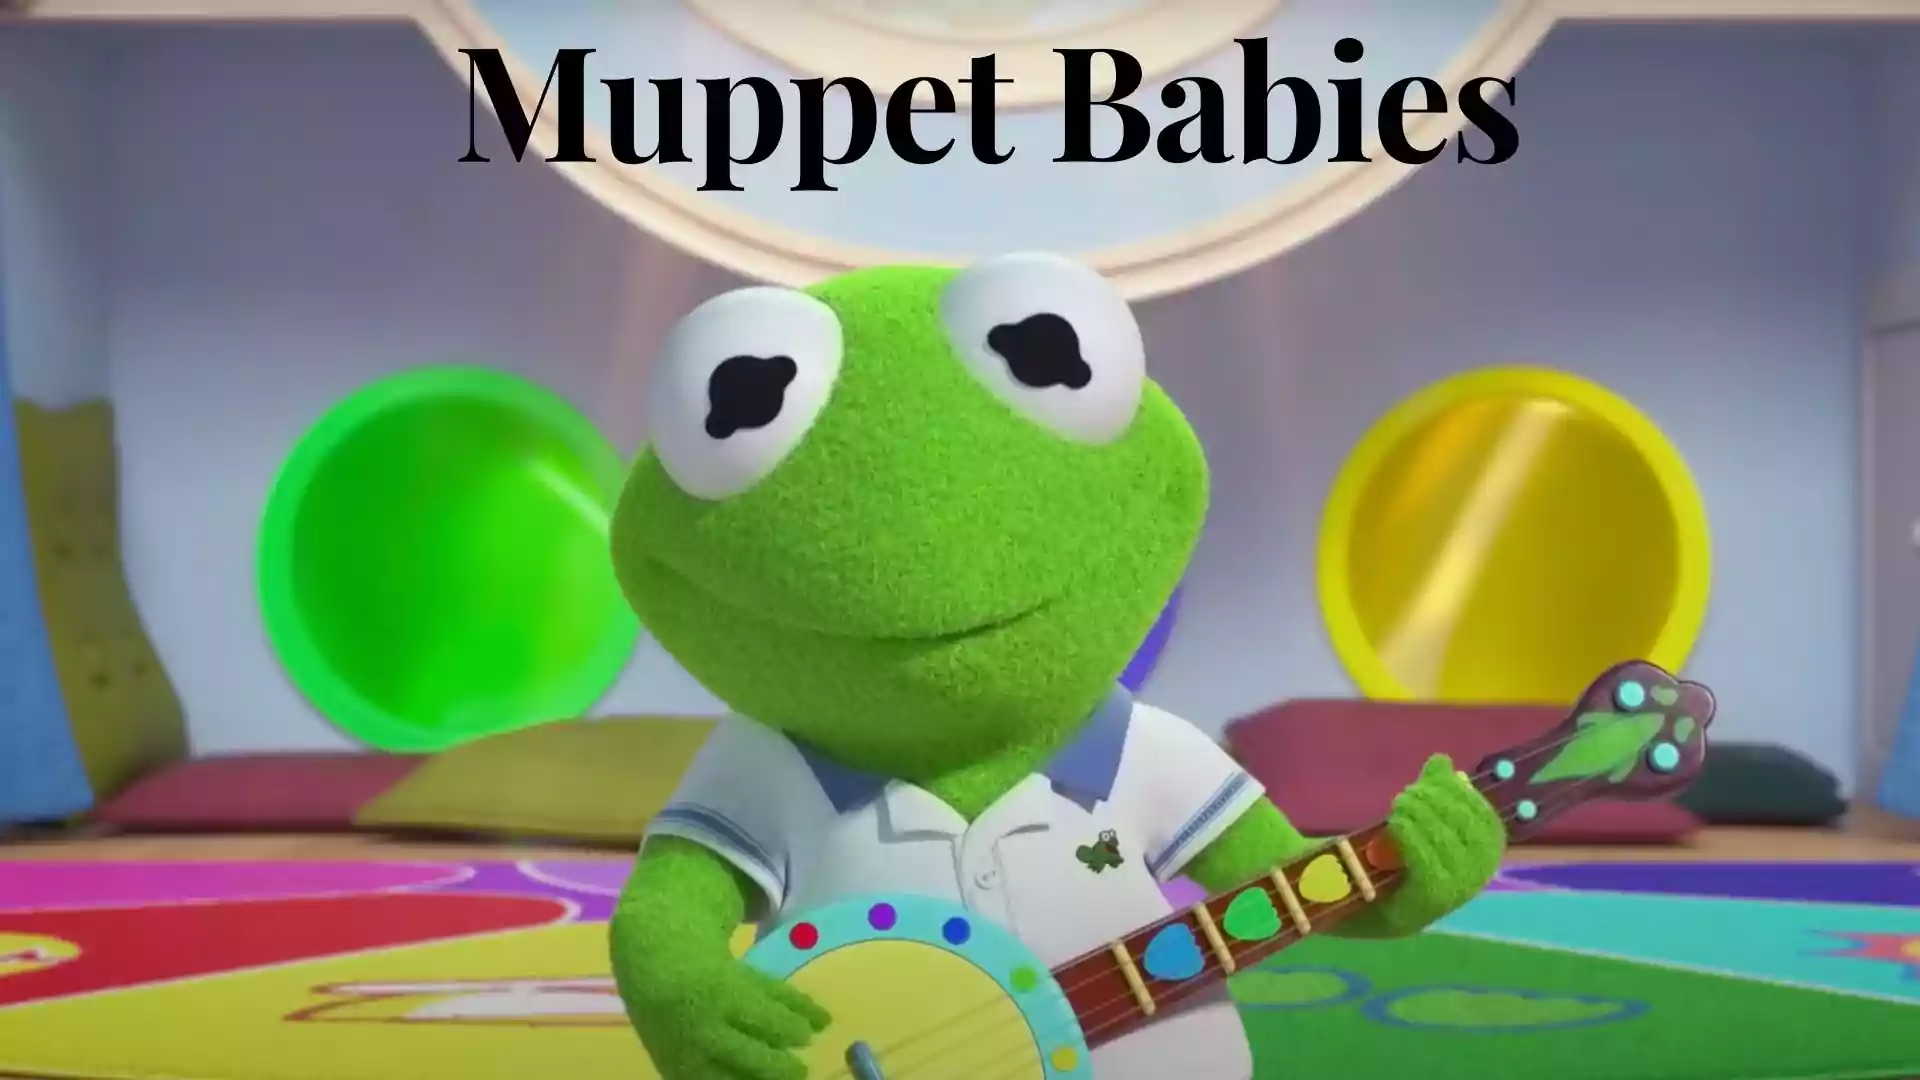 Muppet Babies Wallpaper and Image 2